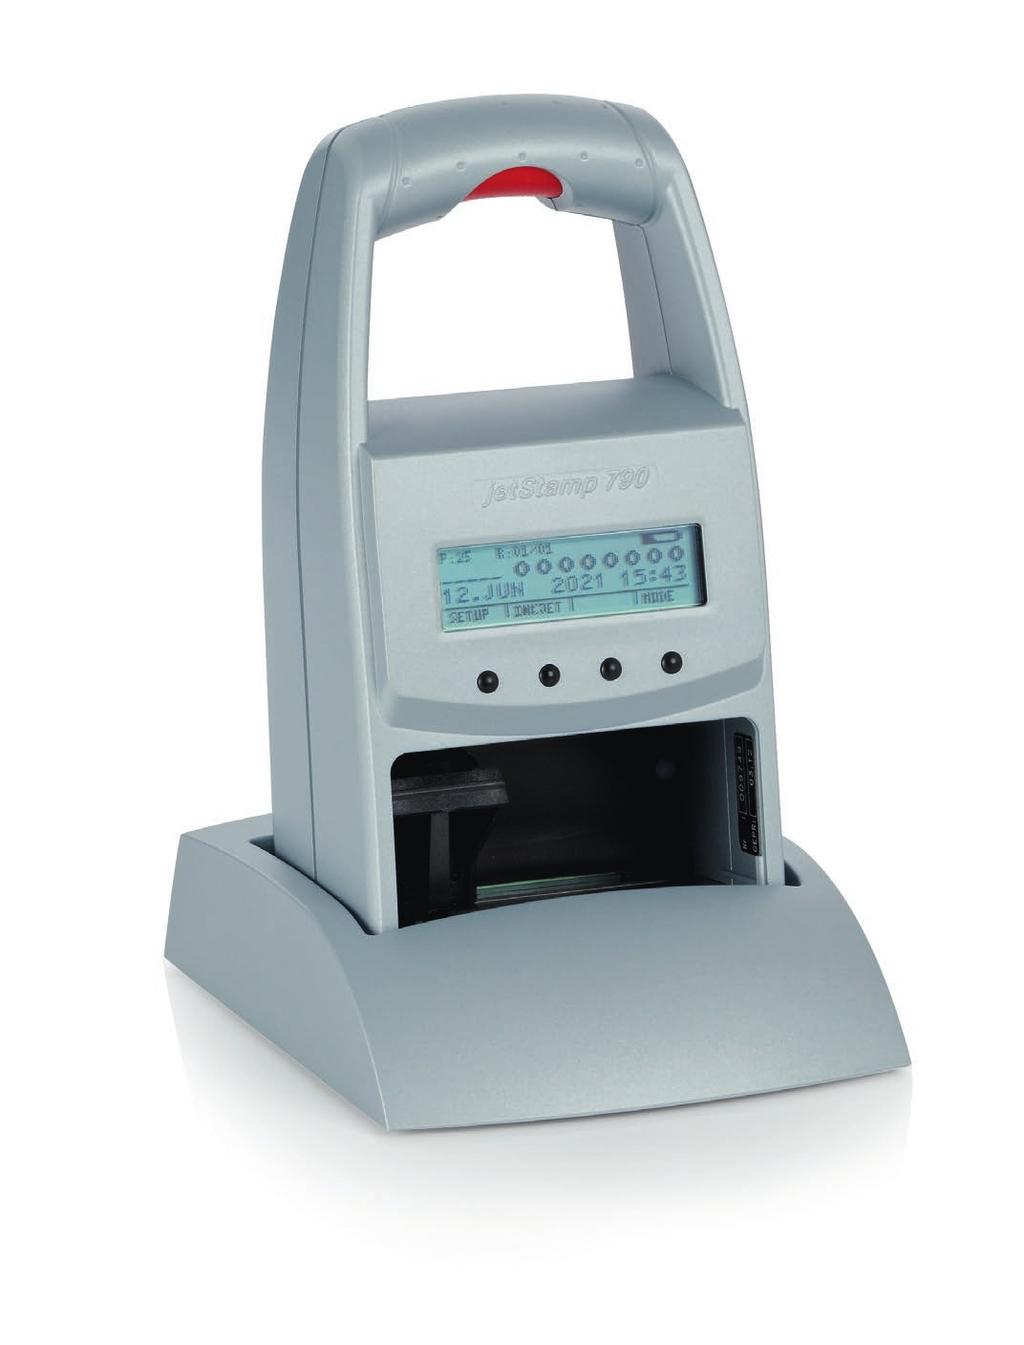 Hand-Held Inkjet Stamp jetstamp 790/791/792 The flexible... The jetstamp-family 790/791/792 Prints easily, quickly and quietly on all even and uneven surfaces, forms, bundles of documents, or envelopes.